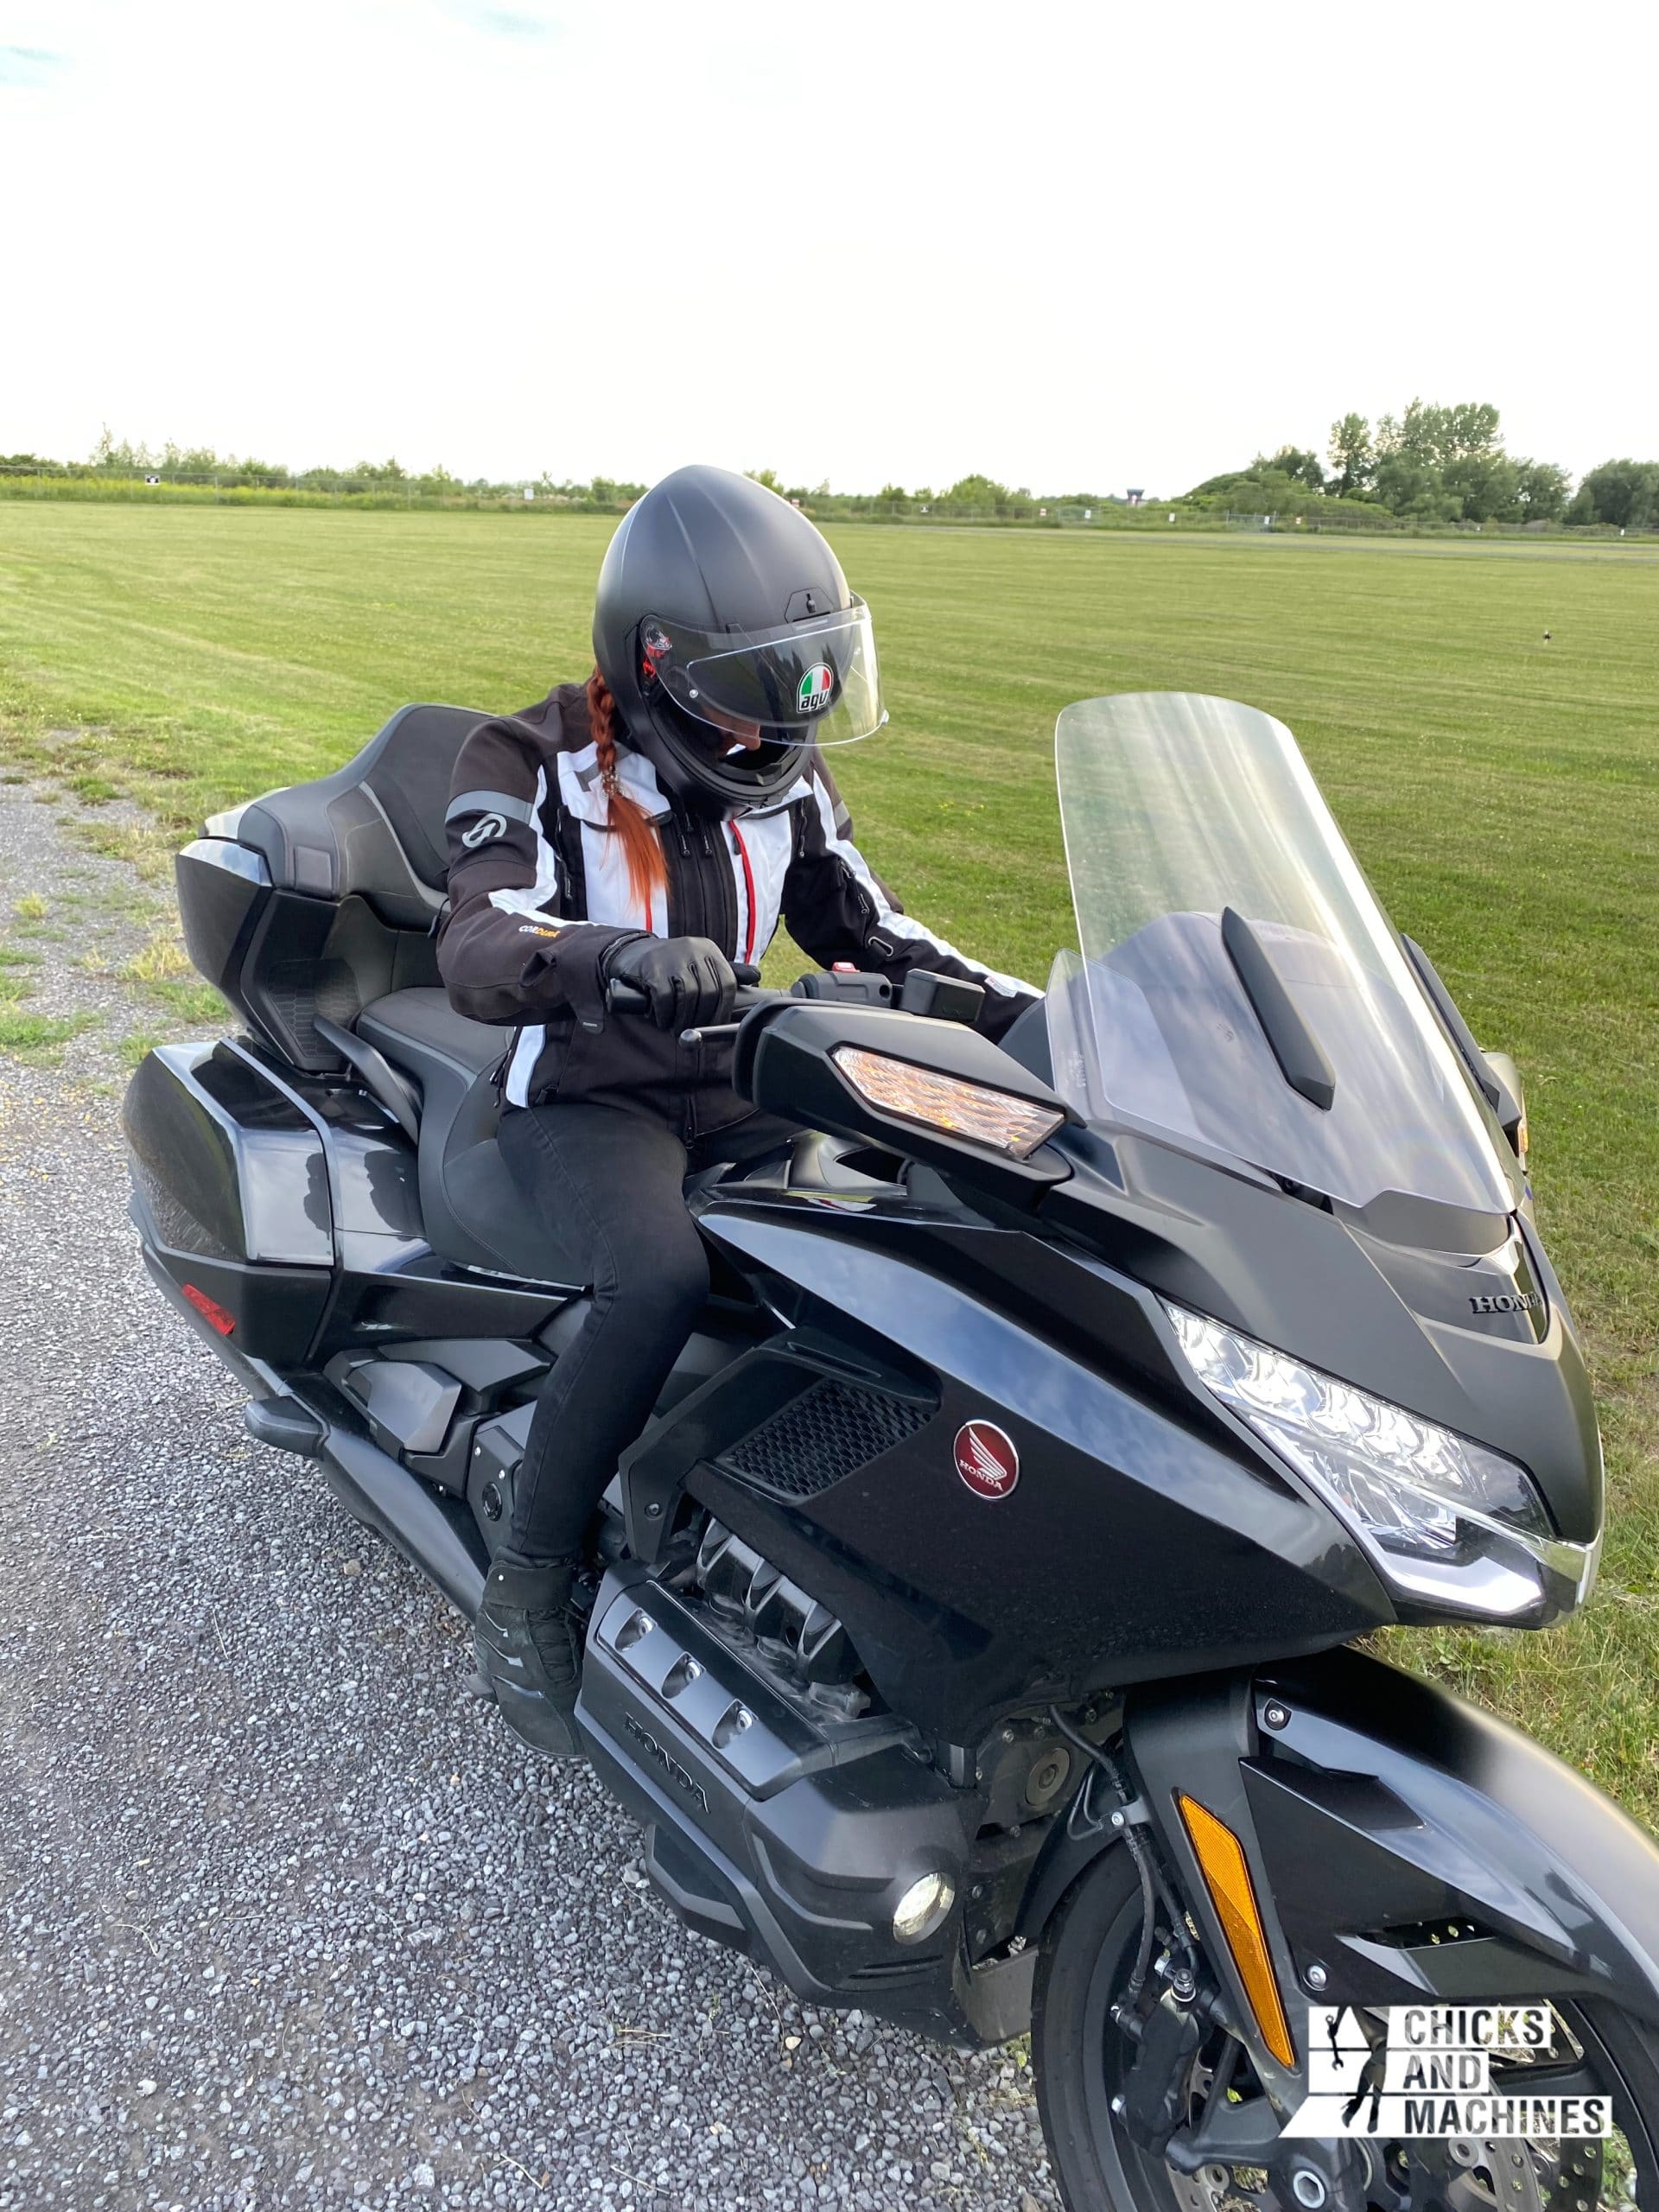 2021 Honda Gold Wing Tour: a test to break down stereotypes